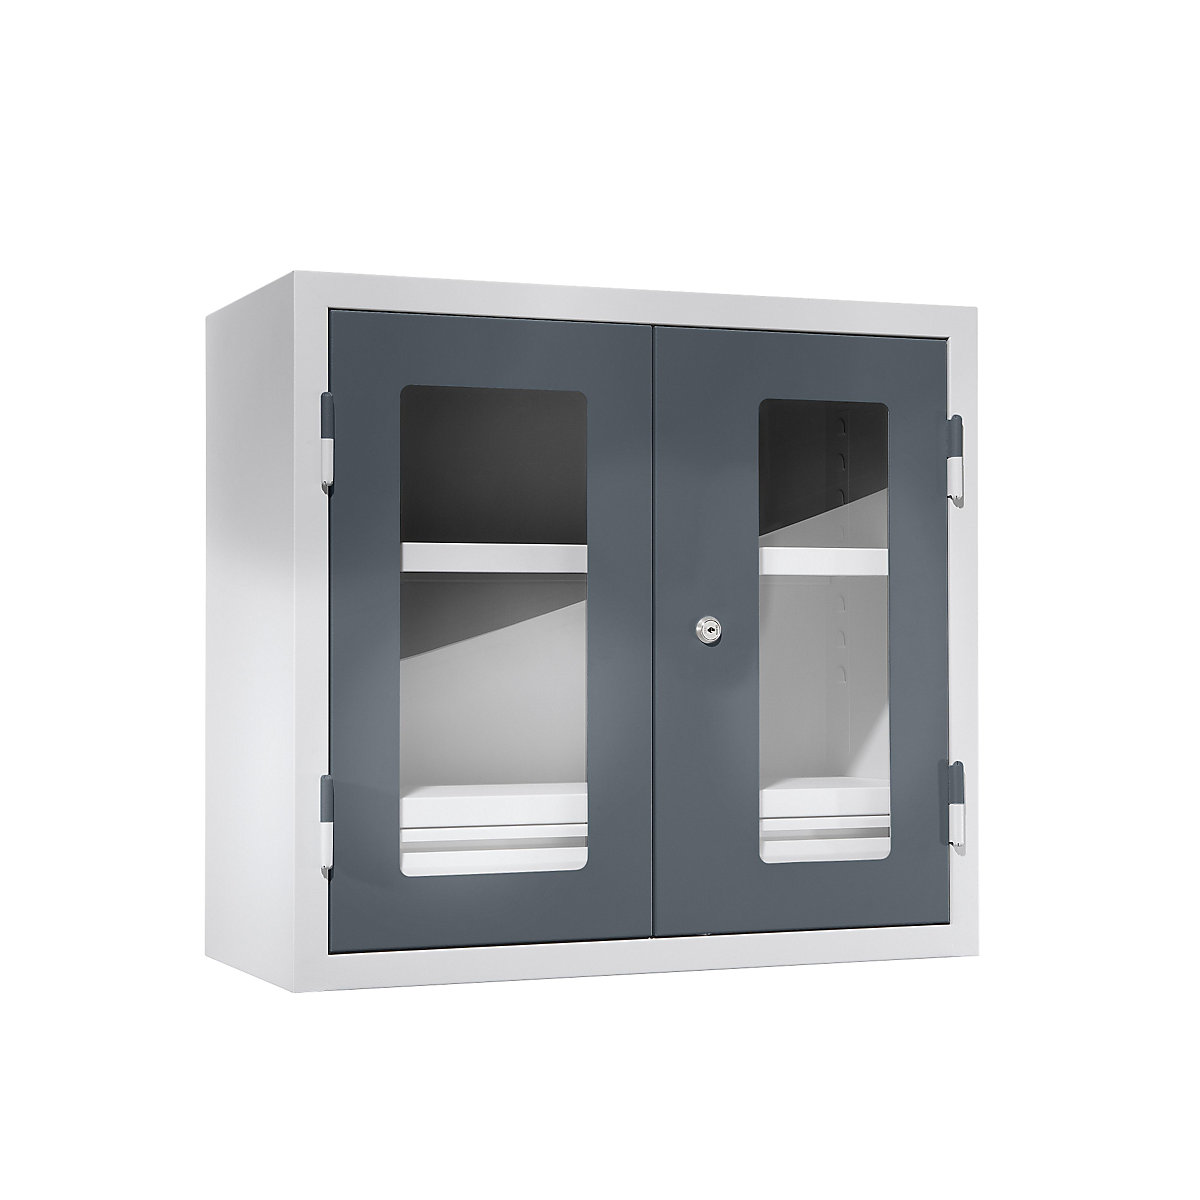 Wall mounted cupboard for the workshop – eurokraft basic, HxWxD 600 x 650 x 320 mm, vision panel doors, with 2 shelves, basalt grey RAL 7012